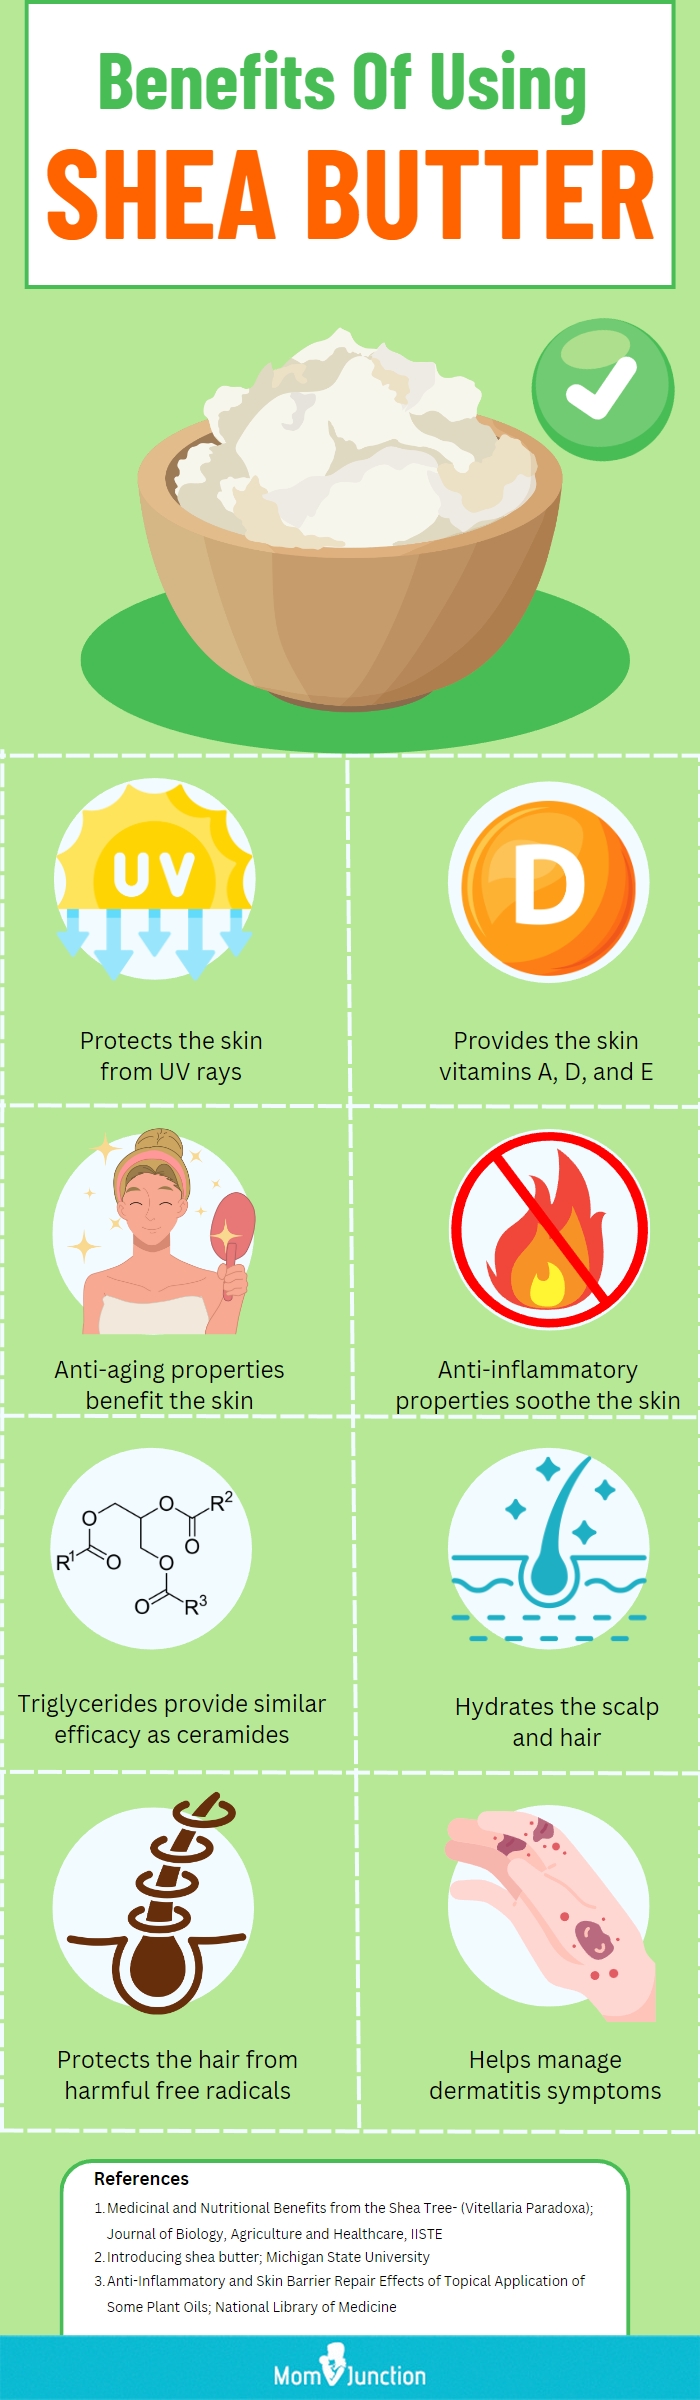 Benefits Of Using Shea Butter (infographic)